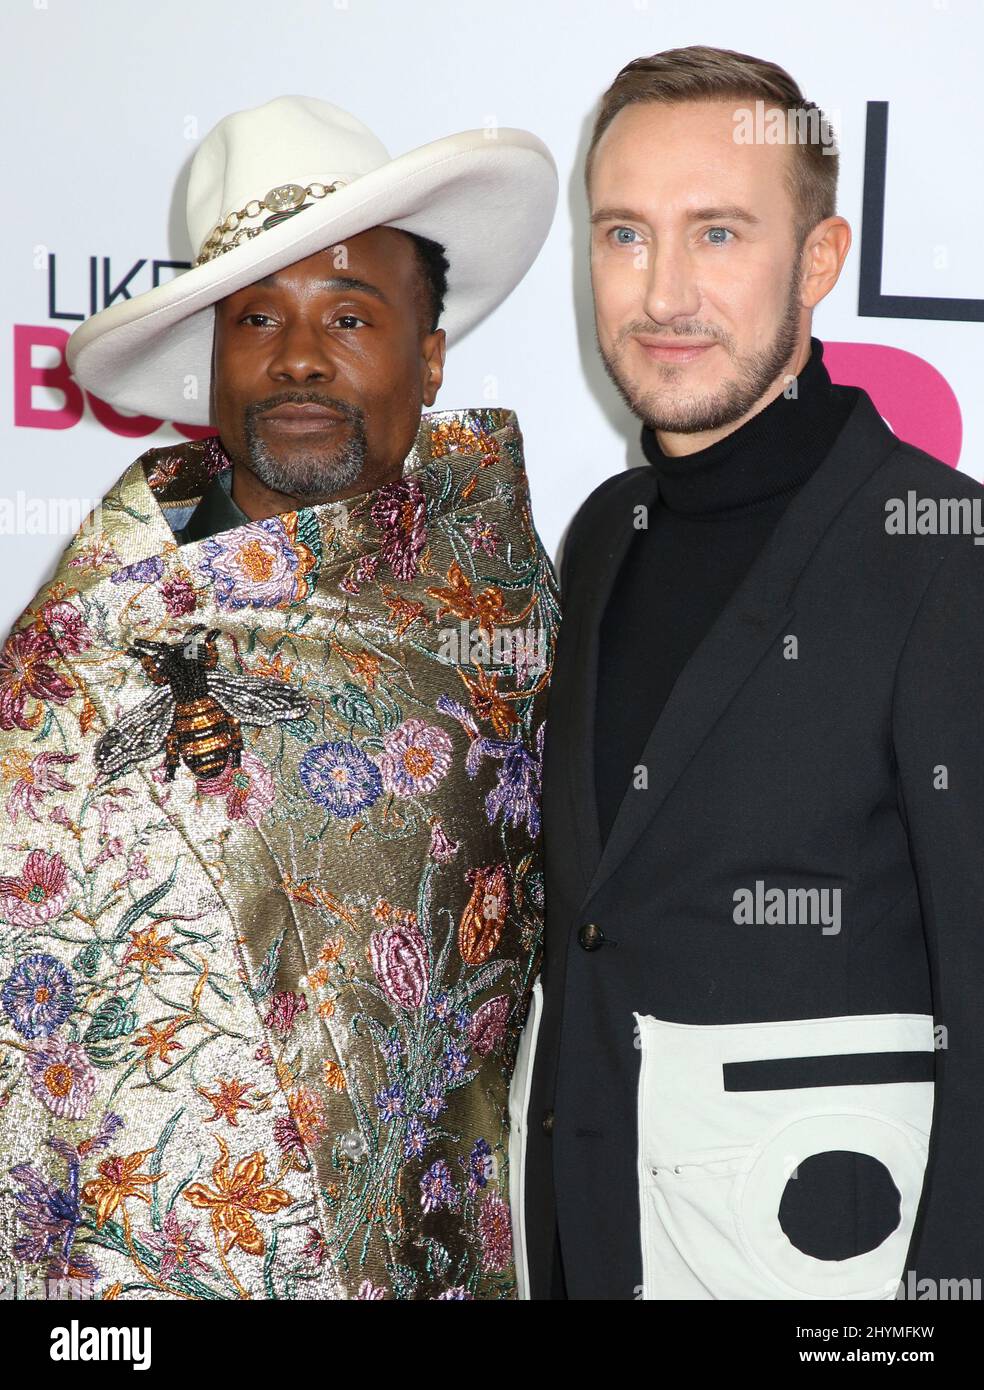 Billy Porter & husband Adam Smith attending the 'Like A Boss' New York  Premiere held at the SVA Theatre on January 7, 2020 in New York City, NY  Stock Photo - Alamy